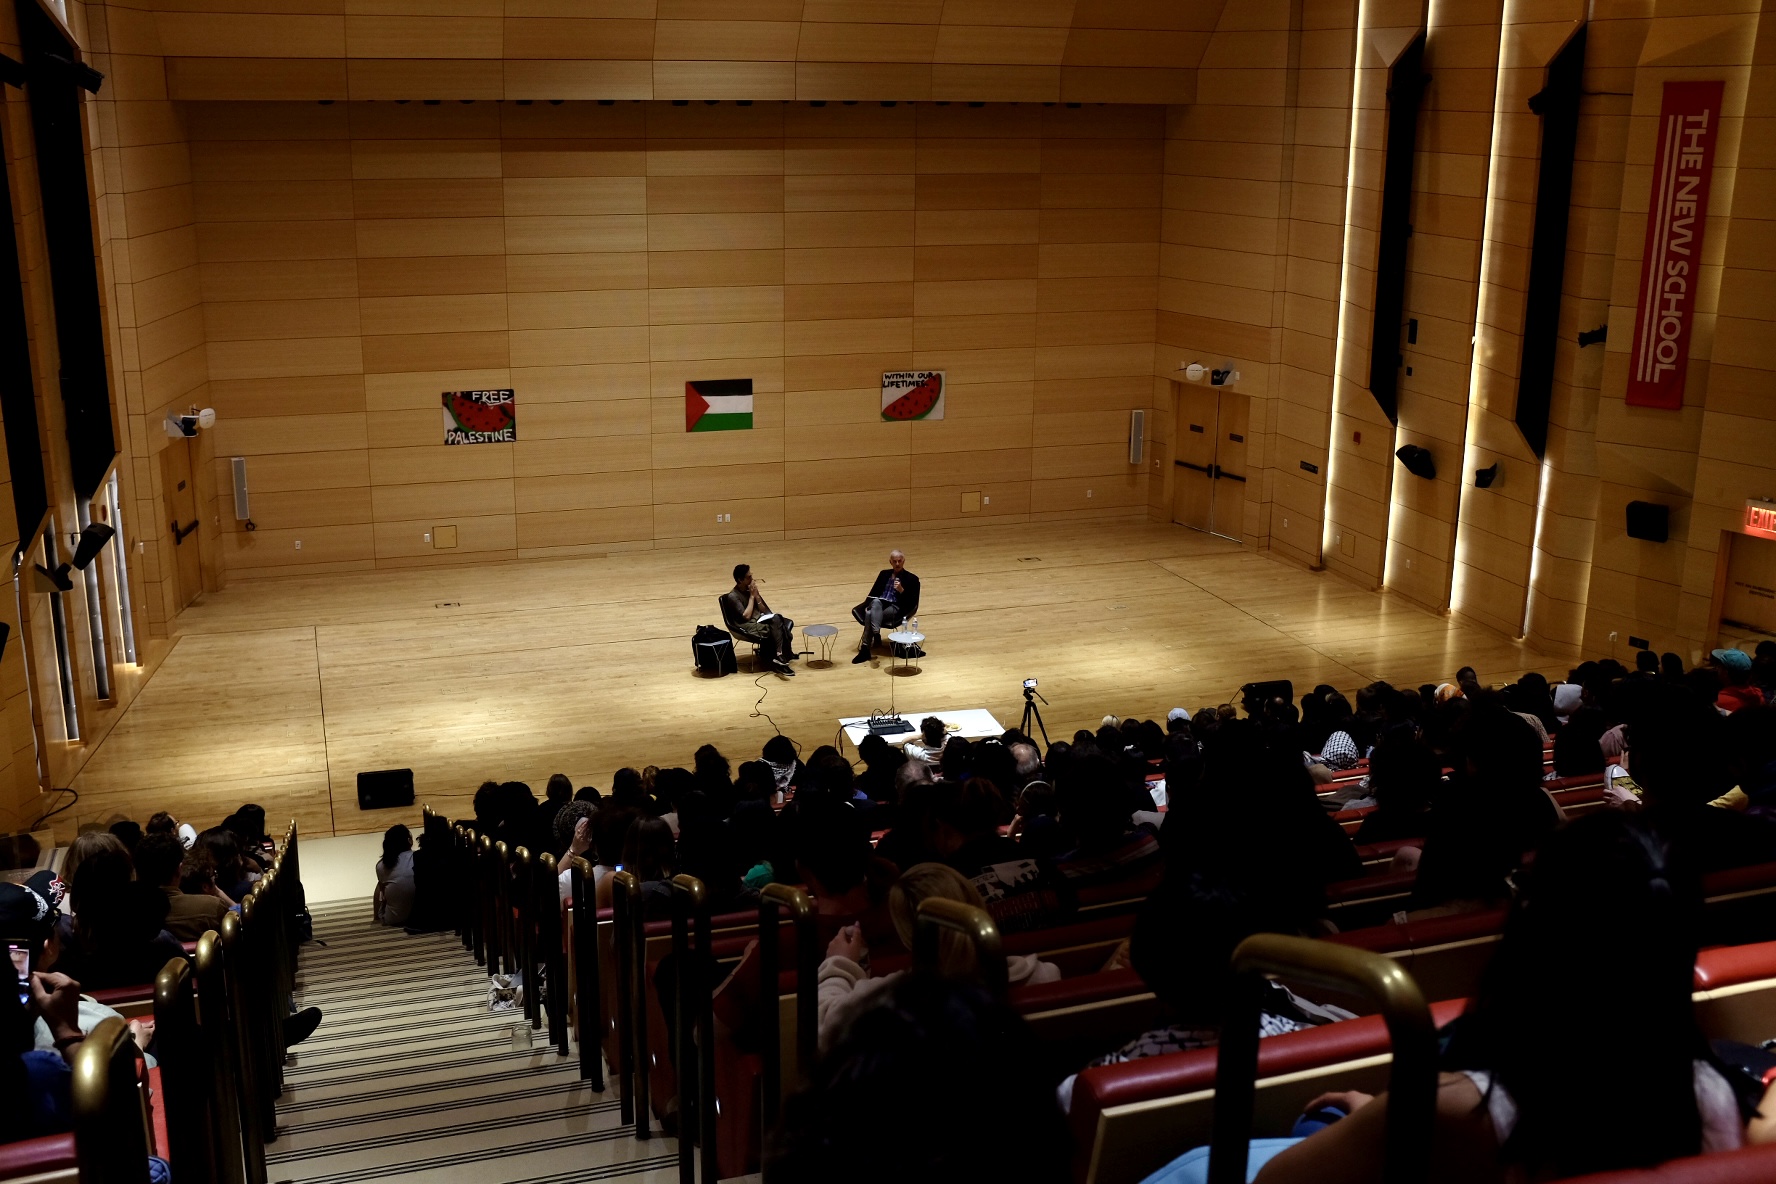 A photo of a large auditorium, taken from the back of the audience. At the center of the image is a flat stage where two individuals are seated on chairs in front of a Palestine flag.